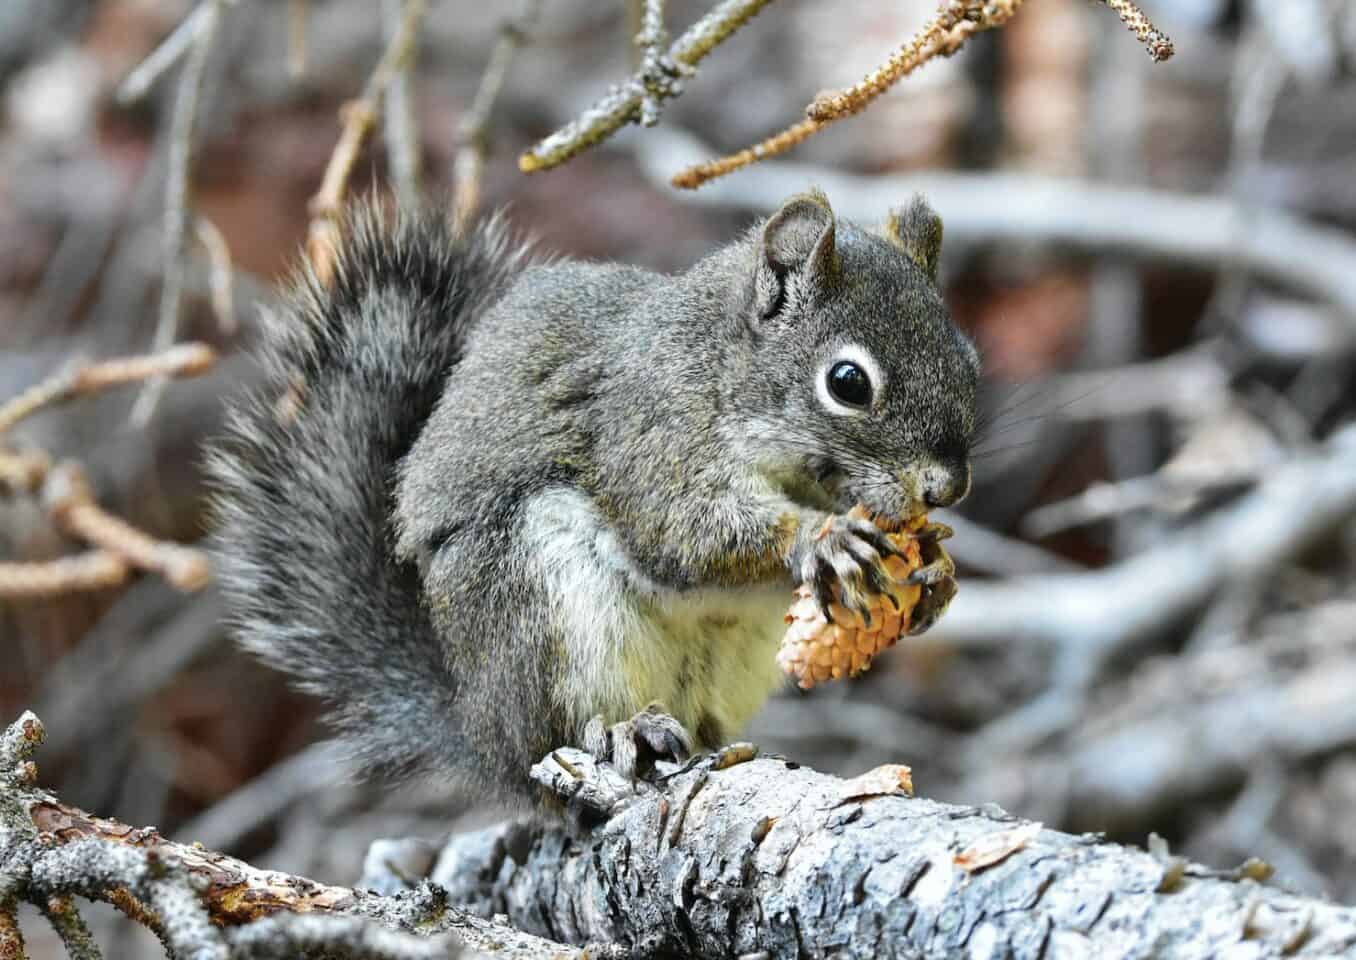 grey squirrel eating a piece of food on a tree branch